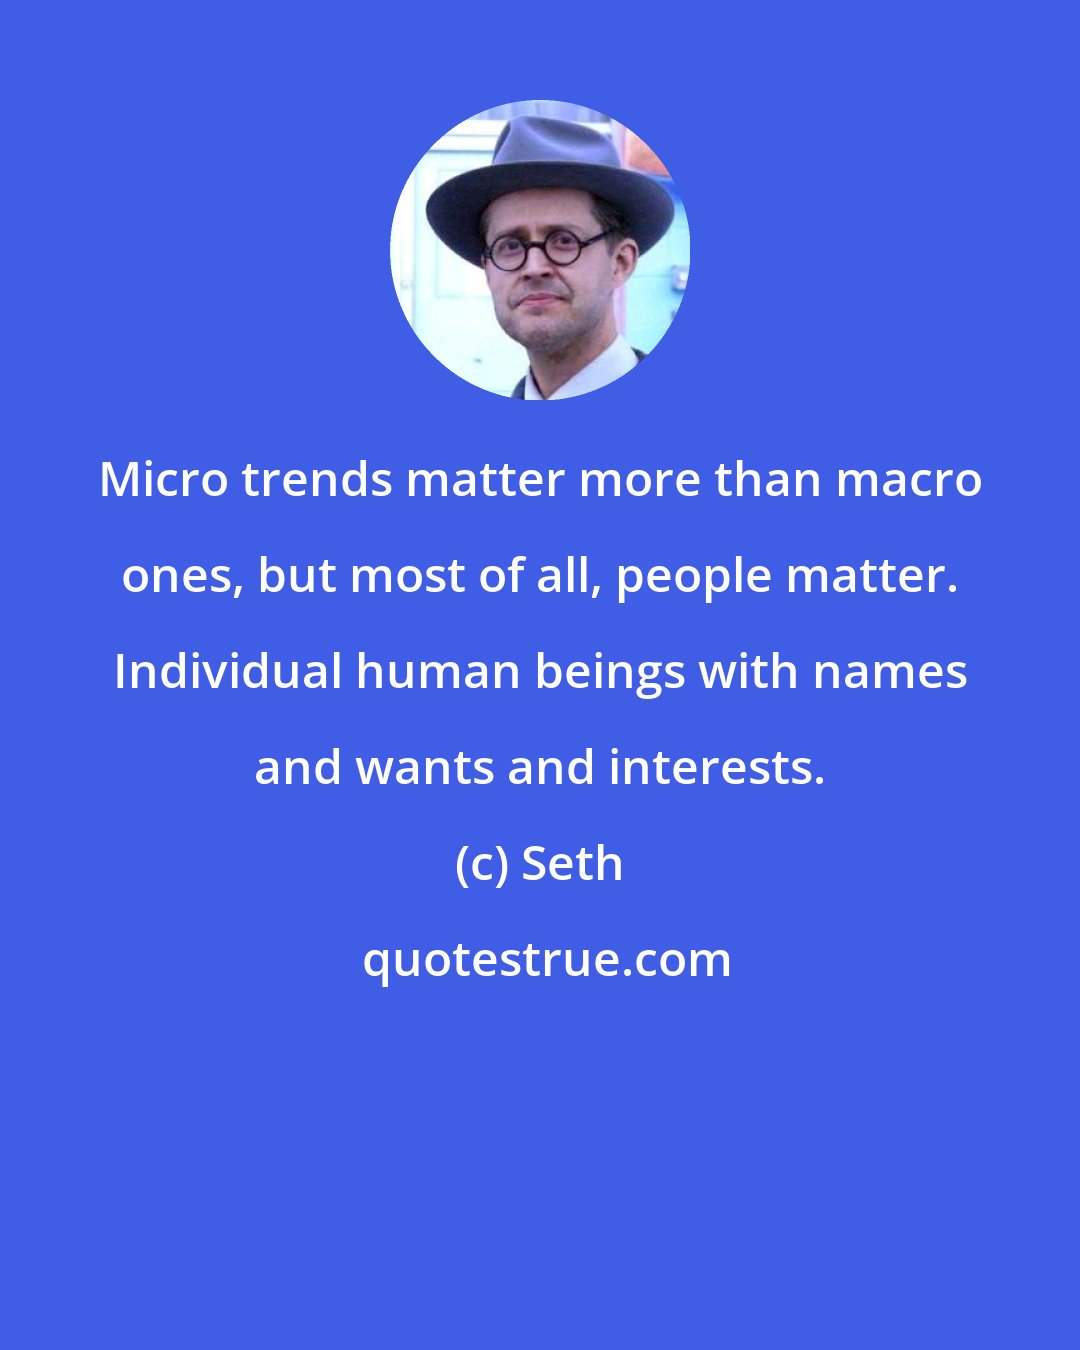 Seth: Micro trends matter more than macro ones, but most of all, people matter. Individual human beings with names and wants and interests.